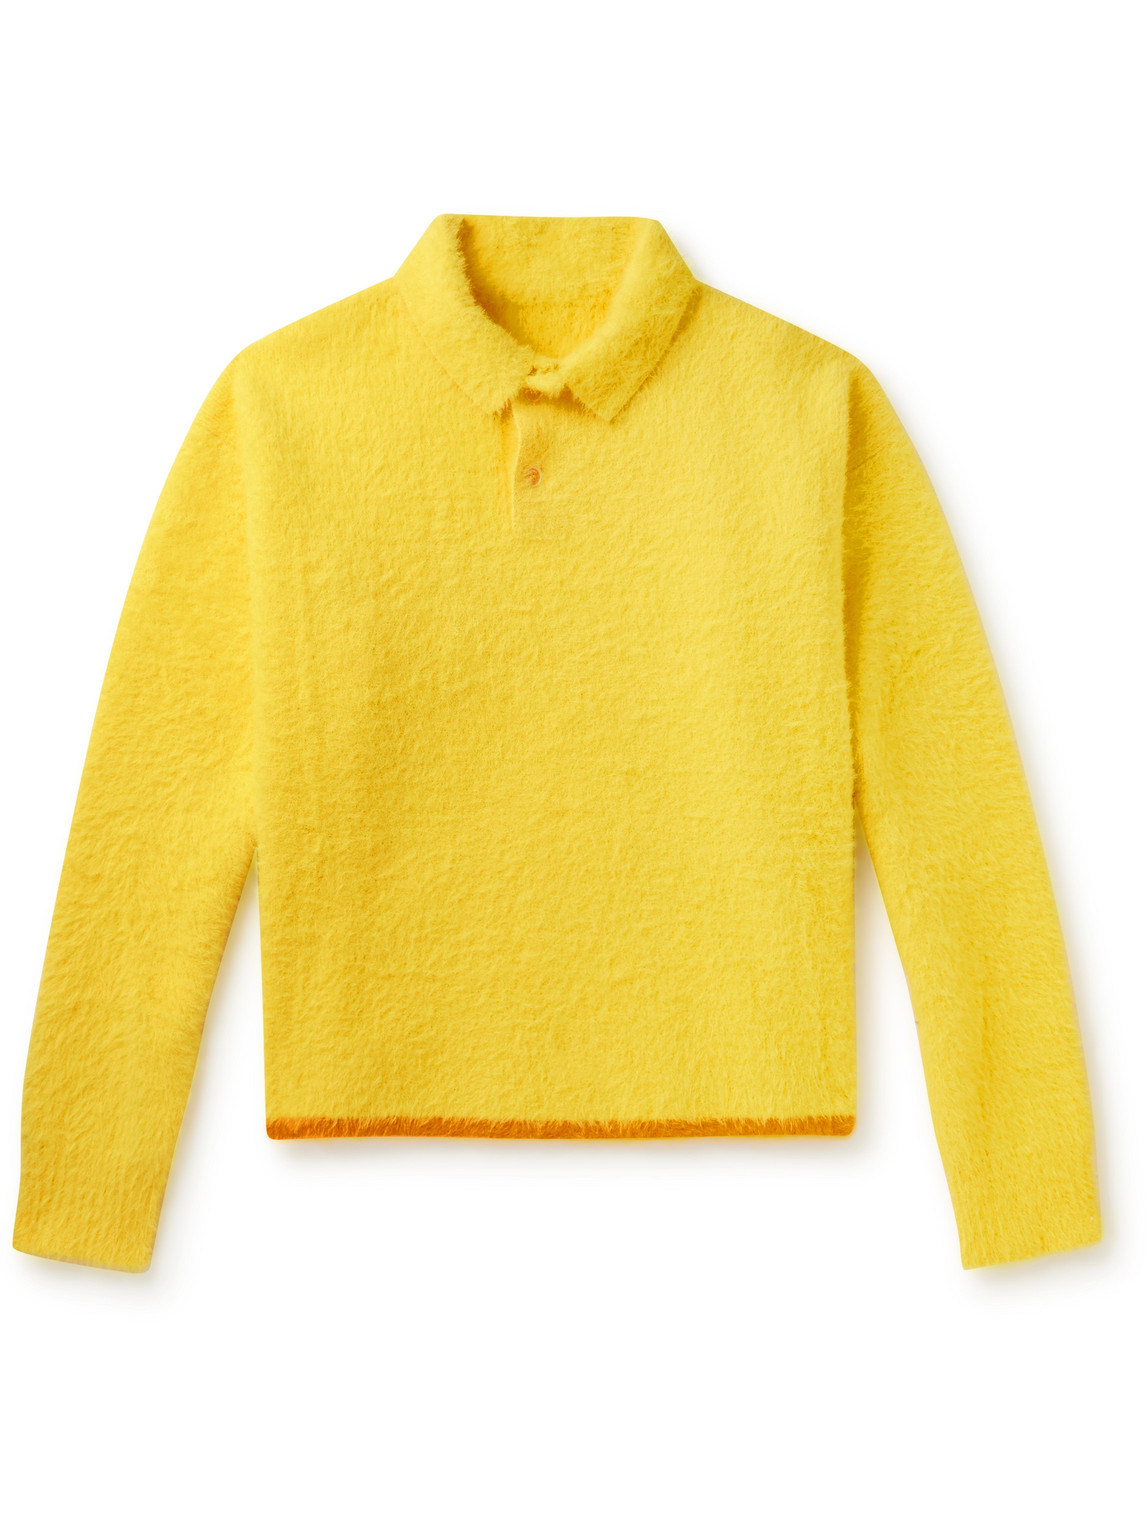 JACQUEMUS POLO NEVE BRUSHED-KNIT jumper